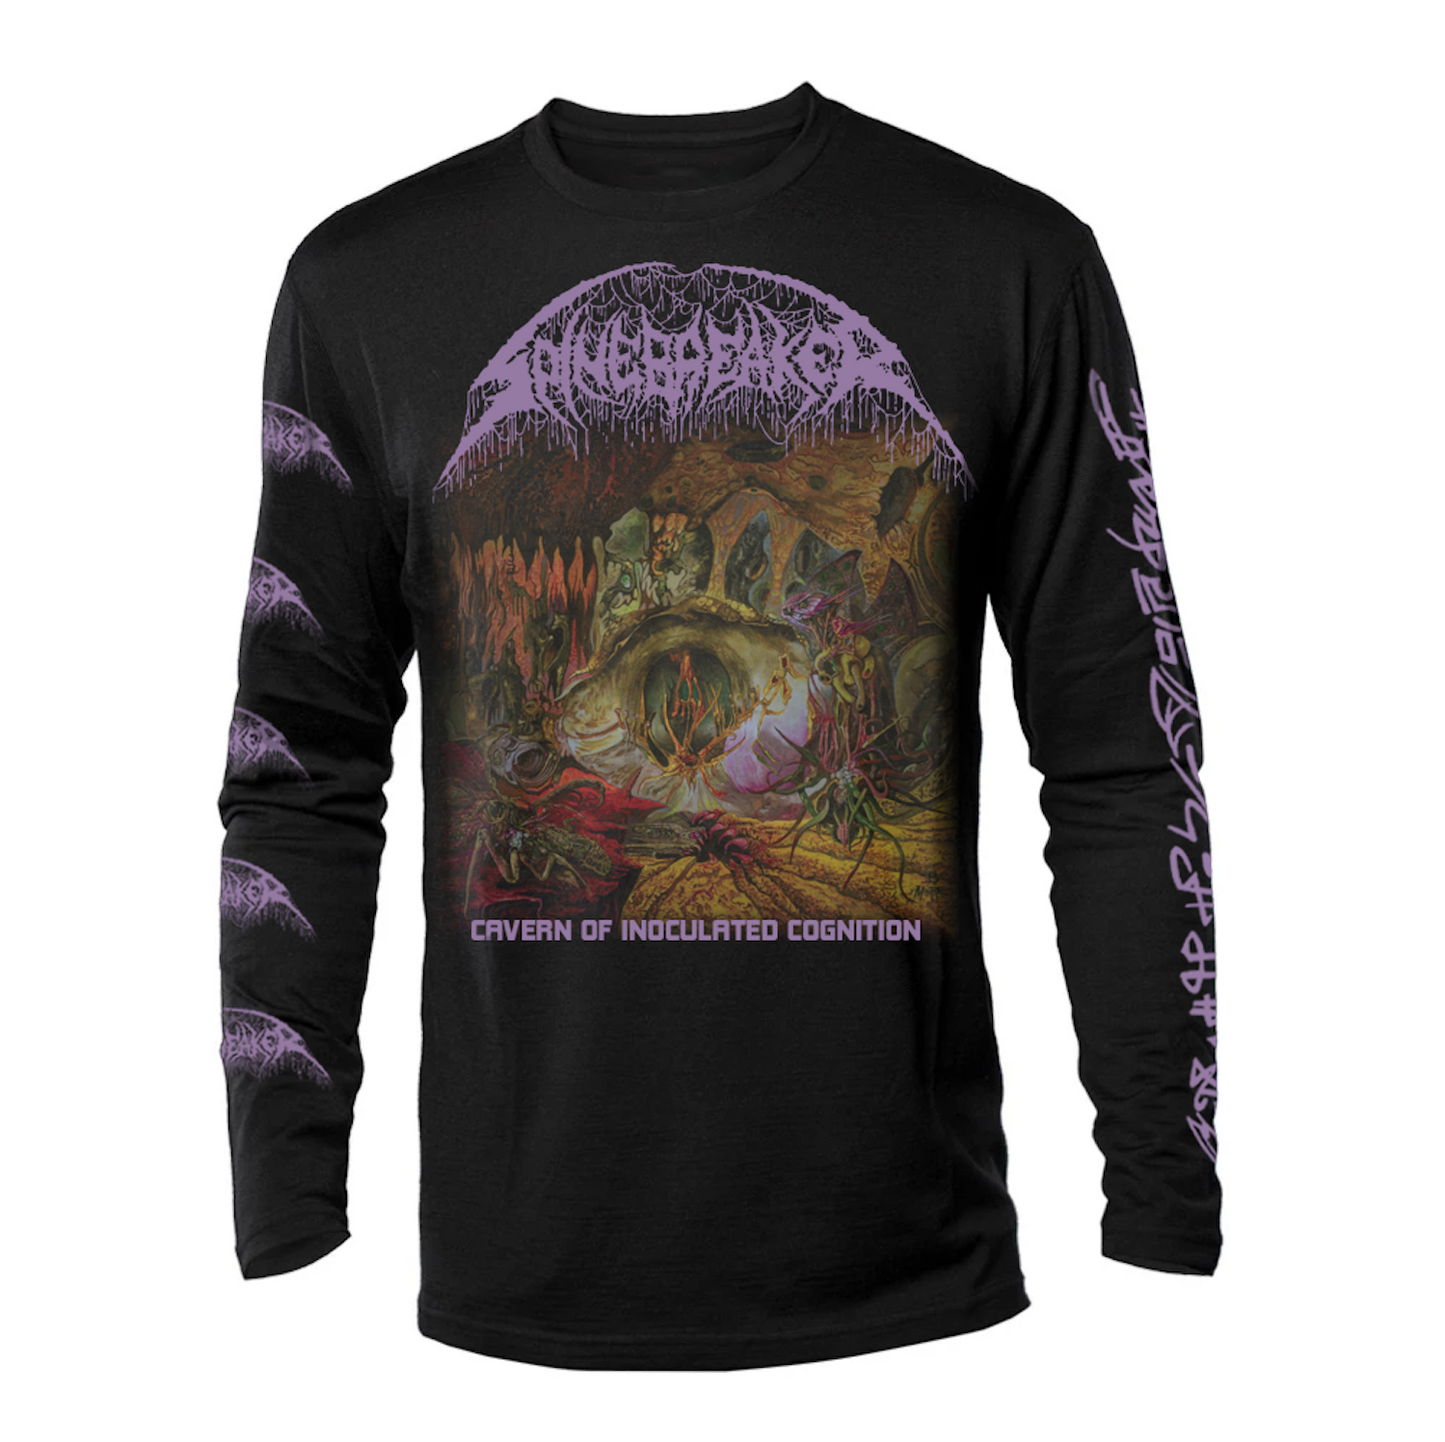 Spinebreaker "Cavern of Inoculated Cognition" 4 Sided Longsleeve